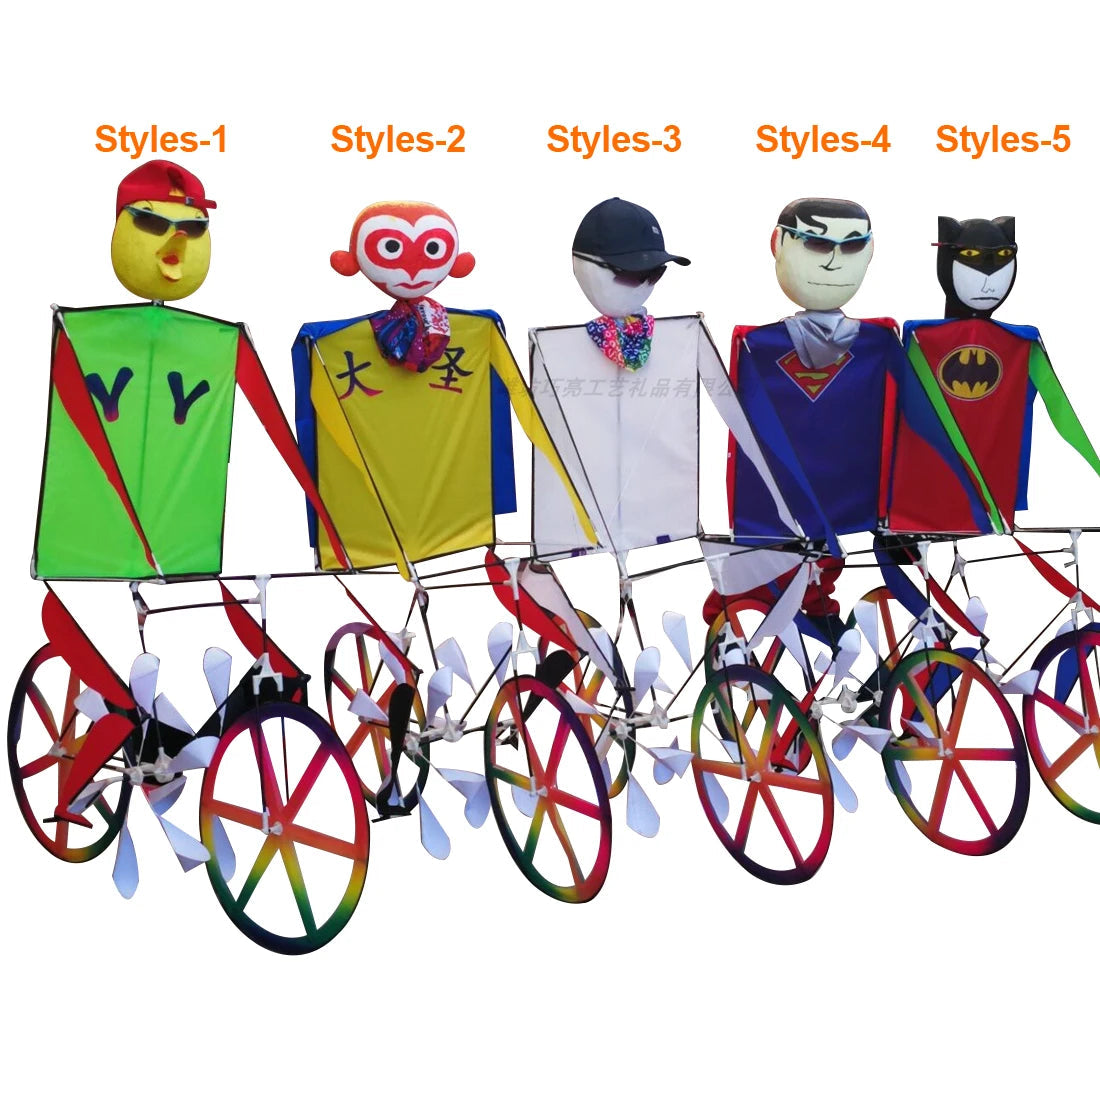 9KM Dynamic Bicycle Kite 1.2m*0.8m Line Laundry Single Line Show Kite with Pedaling Action